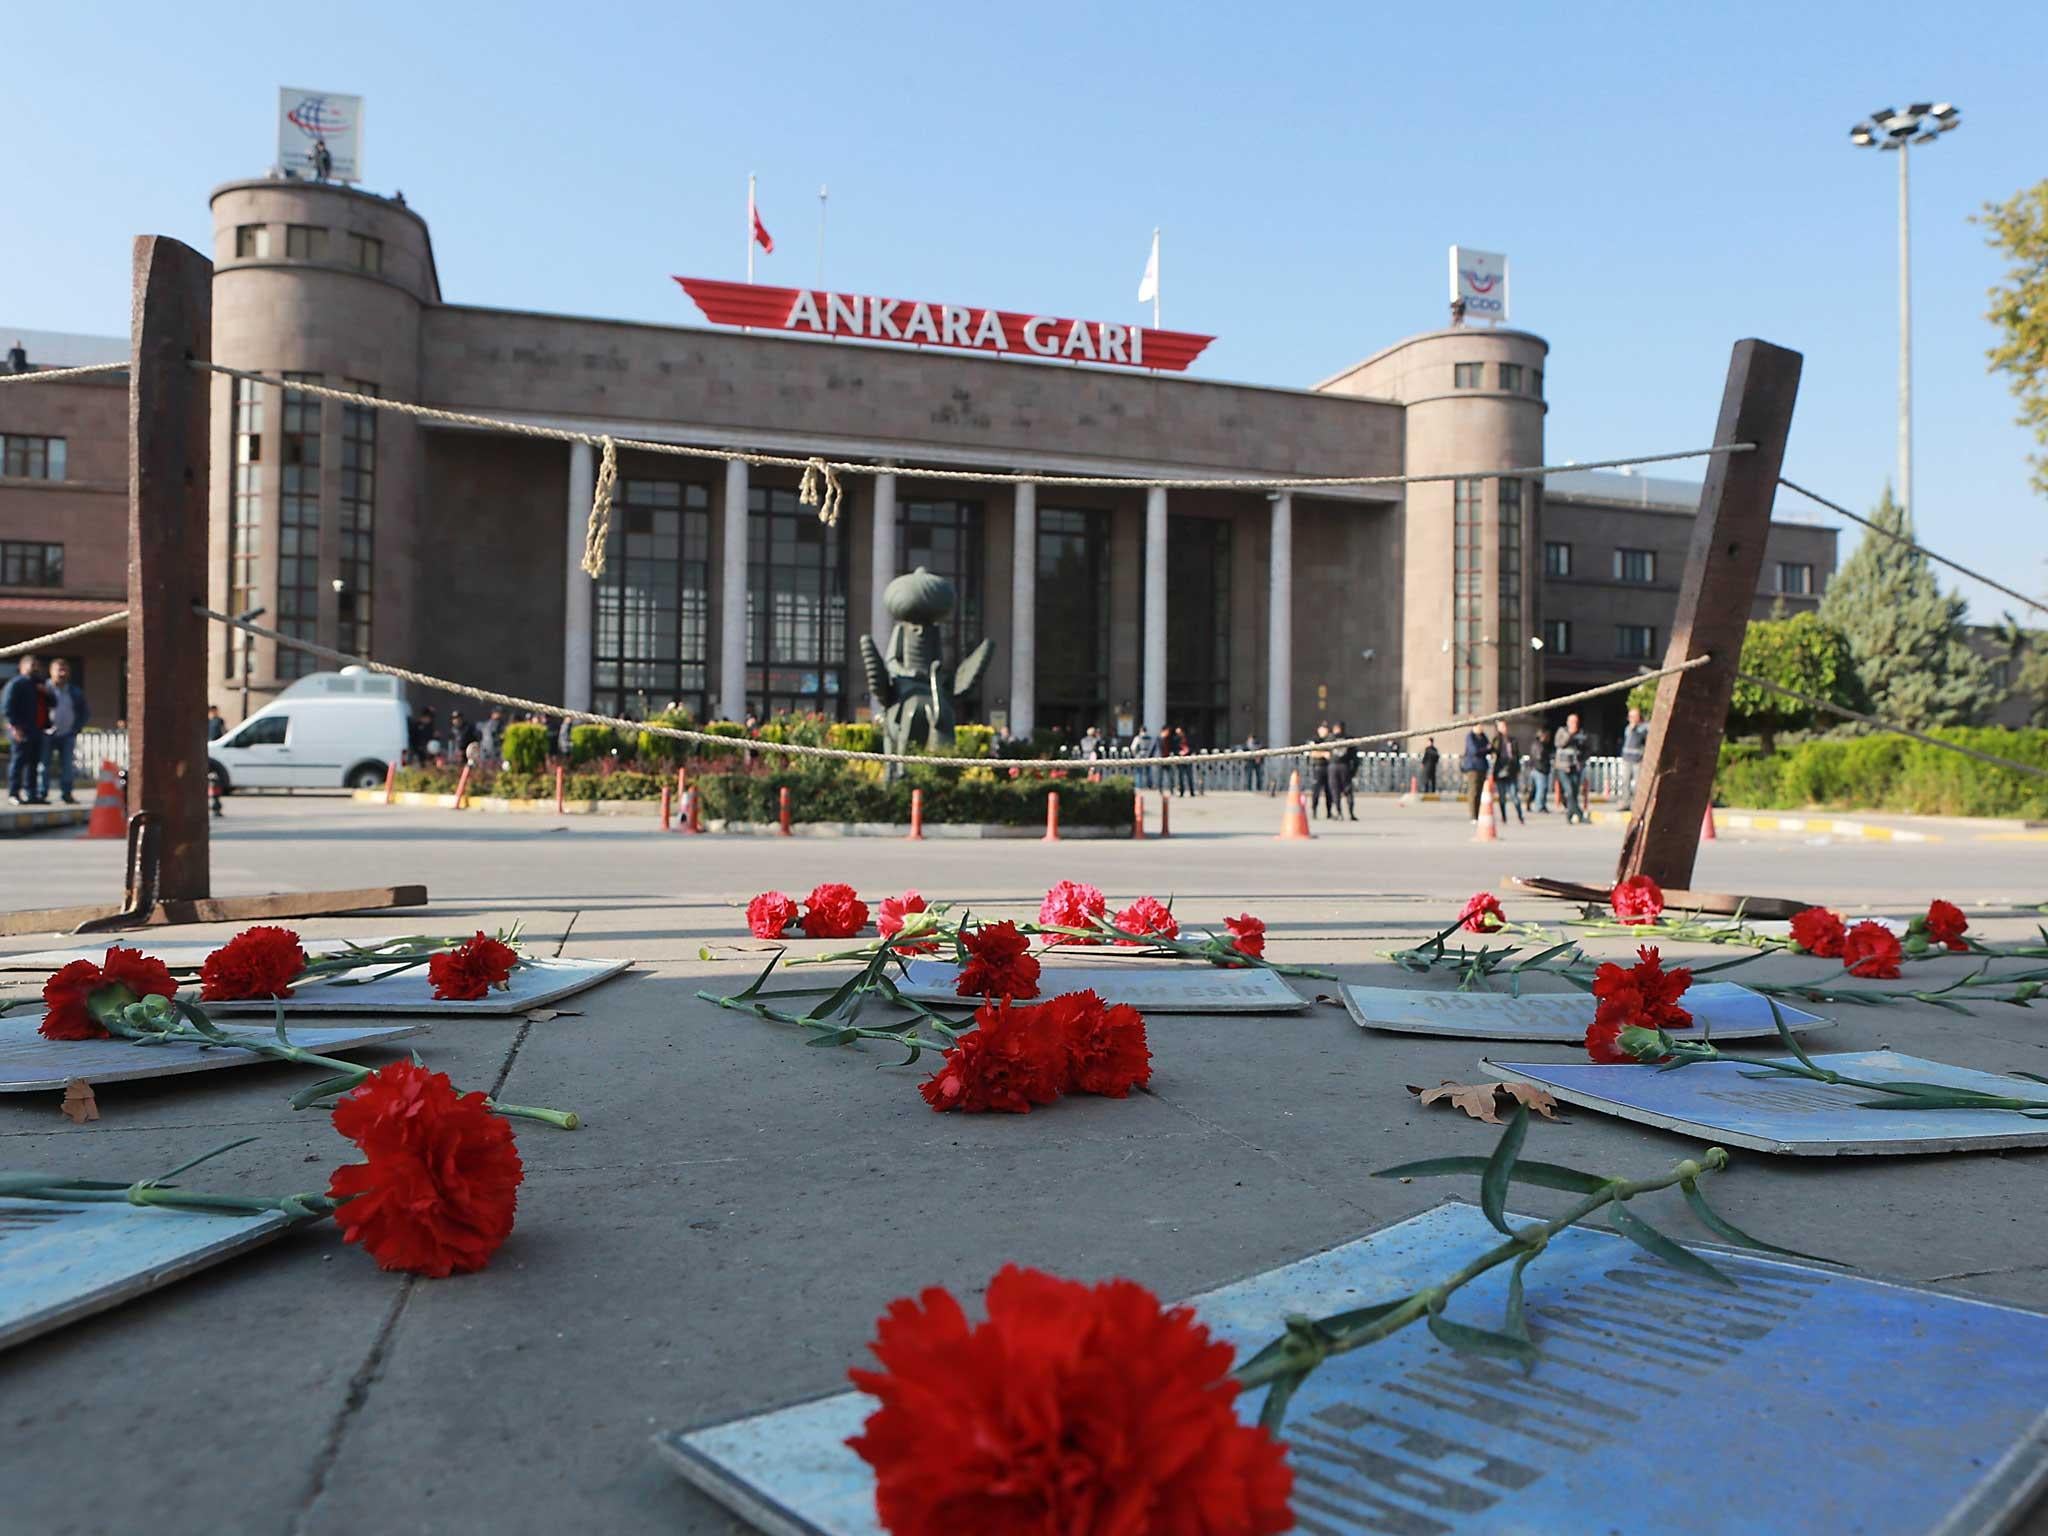 Roses have been placed on the floor to mark the first anniversary of the worst attack in Turkey's modern history